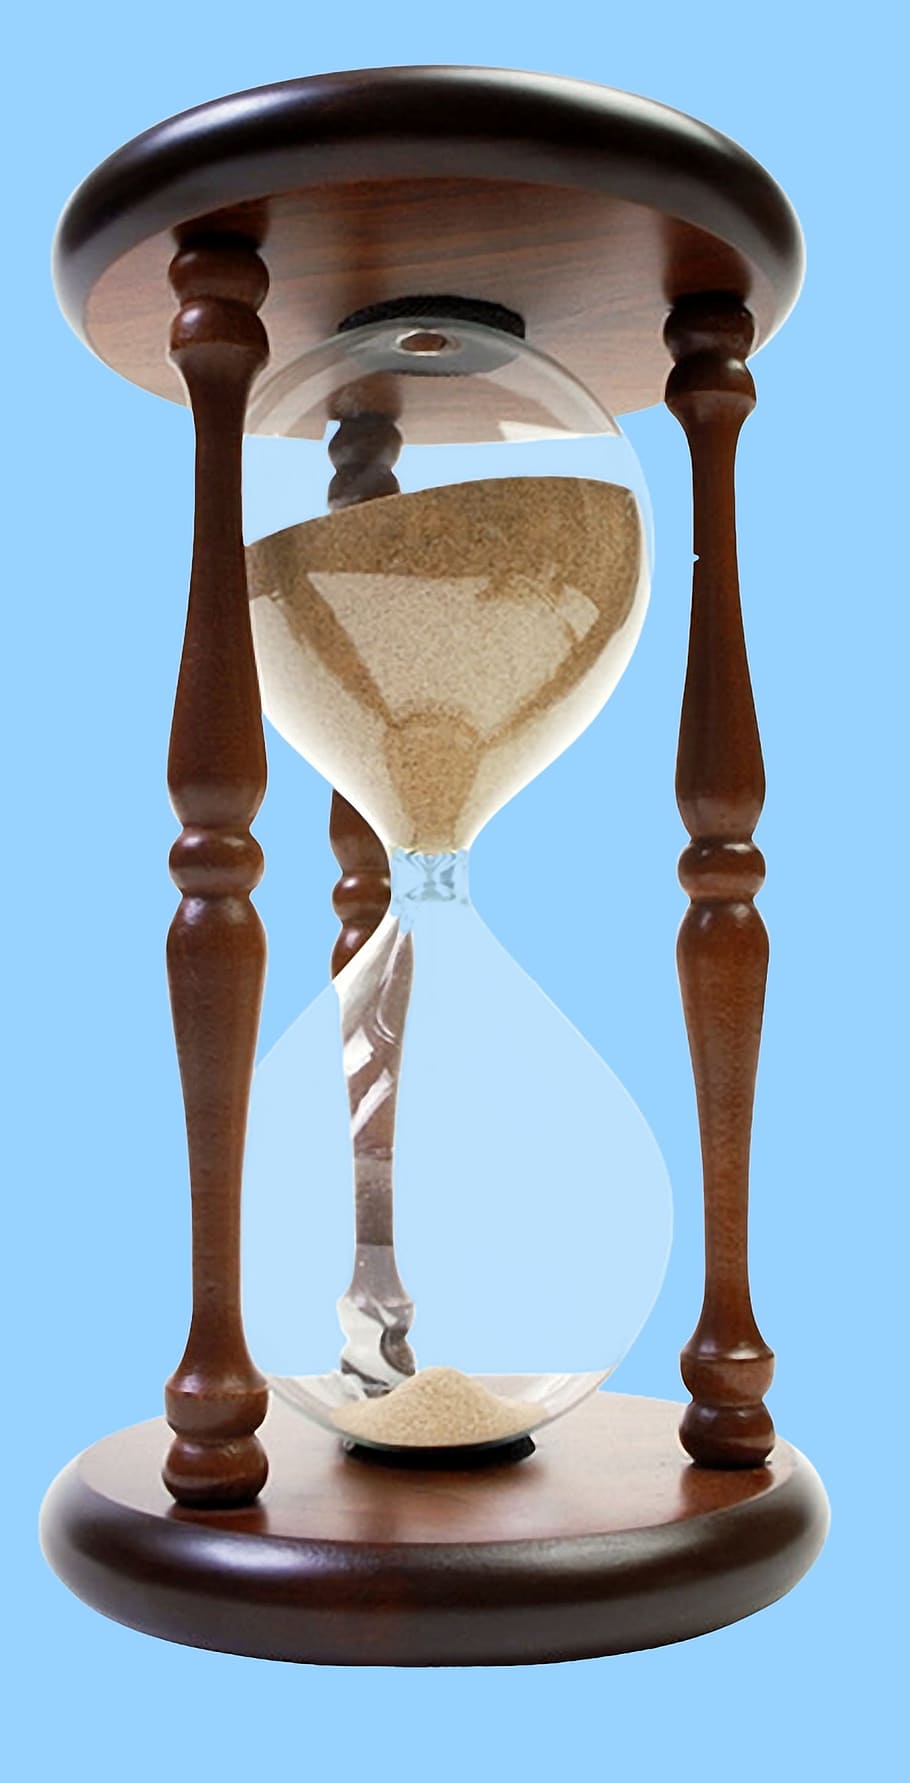 brown, wooden, framed, sand hourglass, hourglass, sand, time, close-up, indoors, studio shot